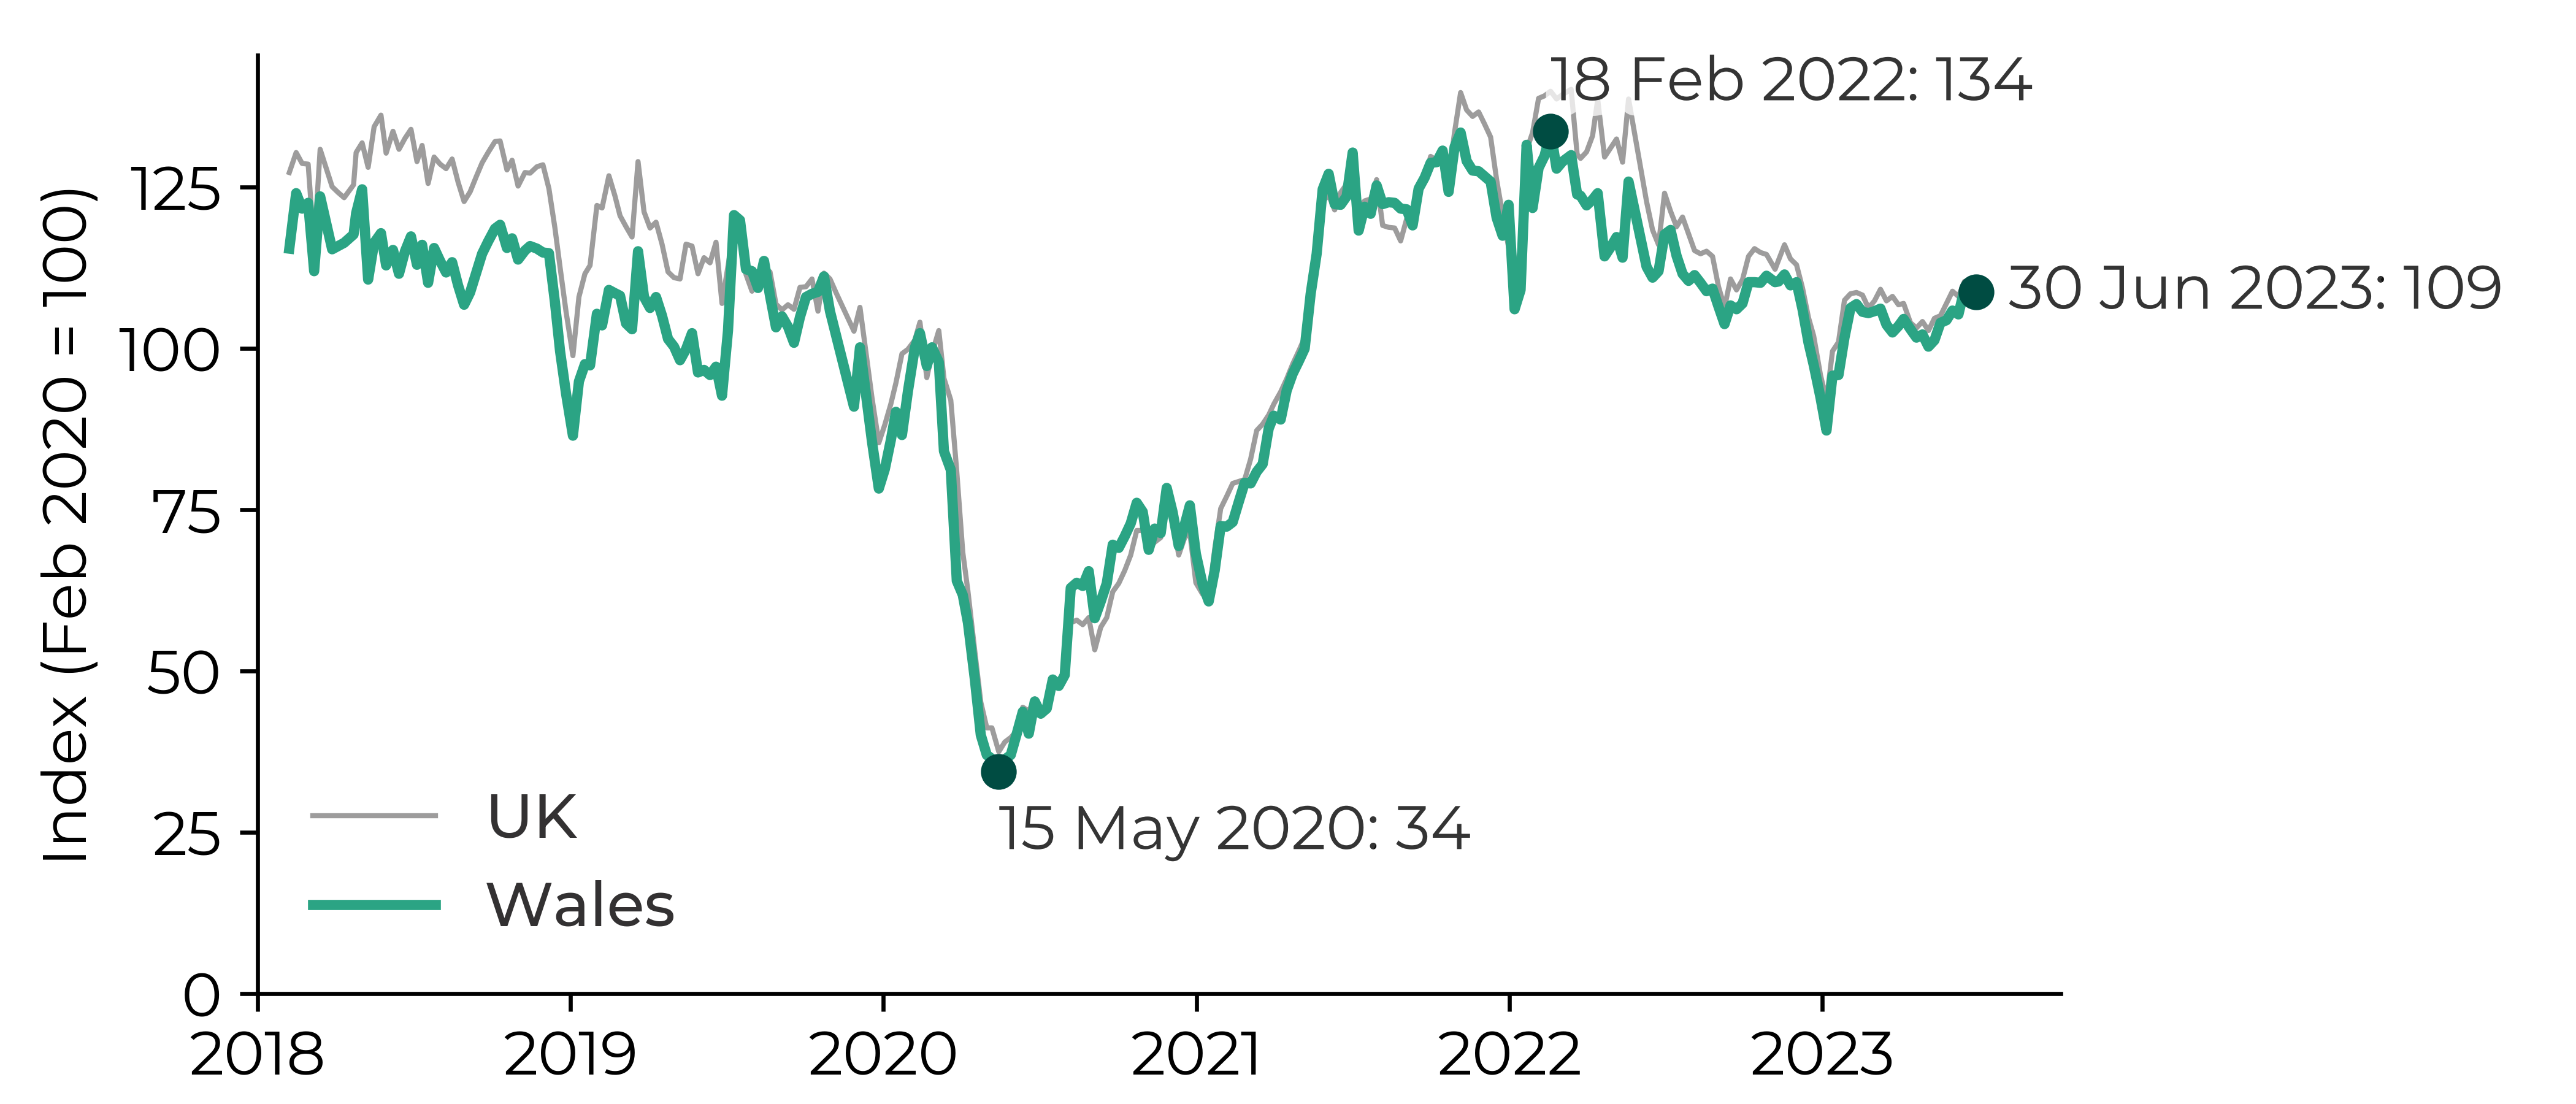 Graph showing that the index decreased from 100 in February 2020 to 34 in May 2020. The index increased to 134 by February 2022 and decreased to 109 by June 2023.